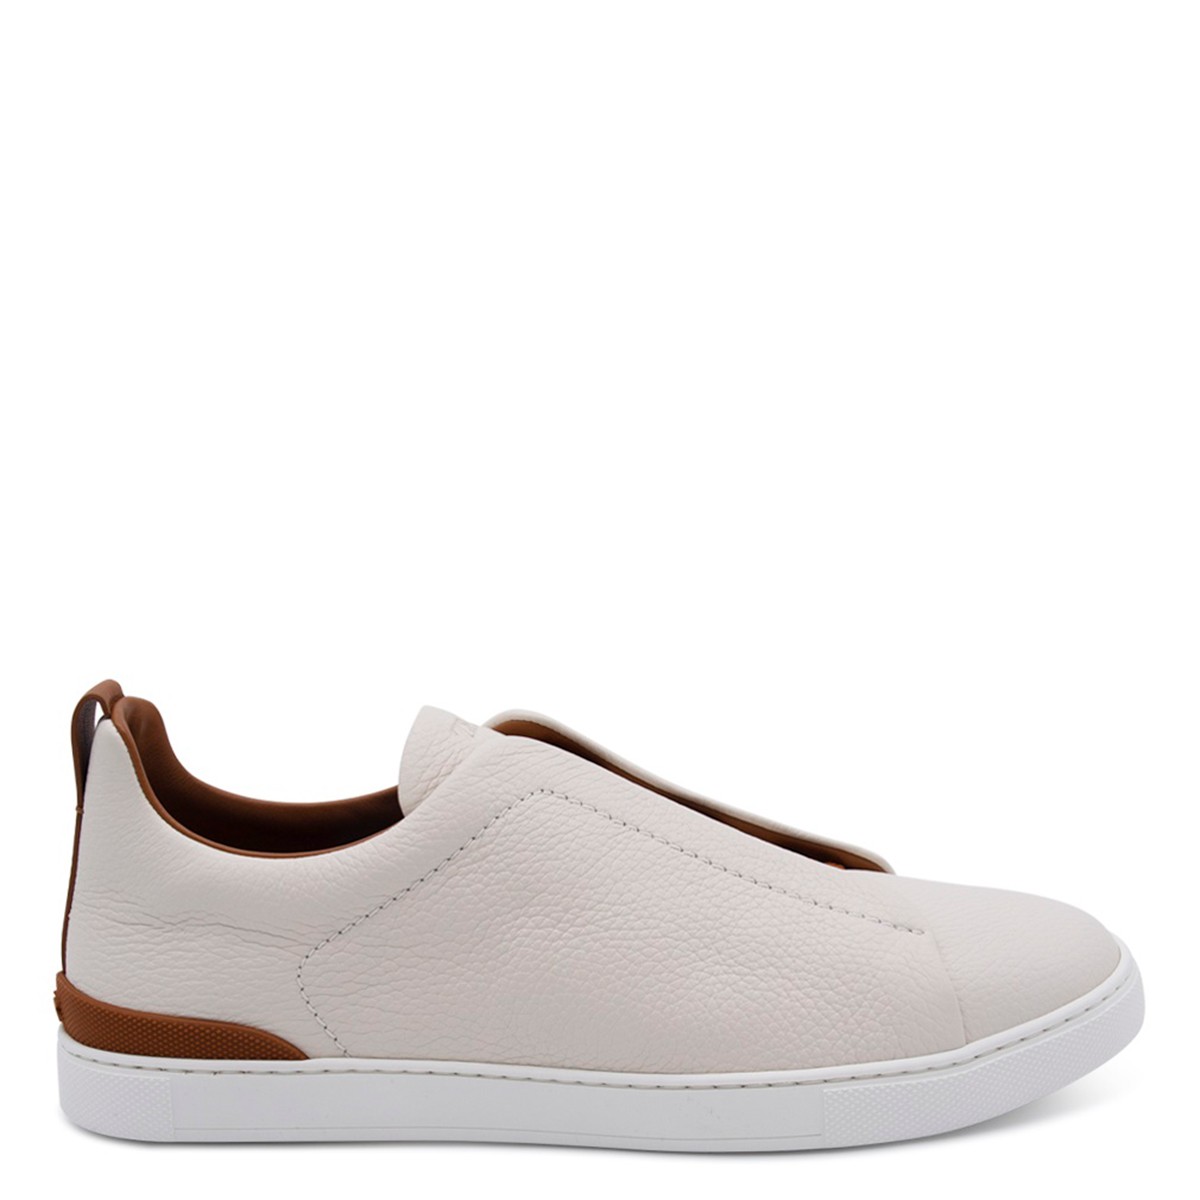 CREAM AND BROWN LEATHER SNEAKERS